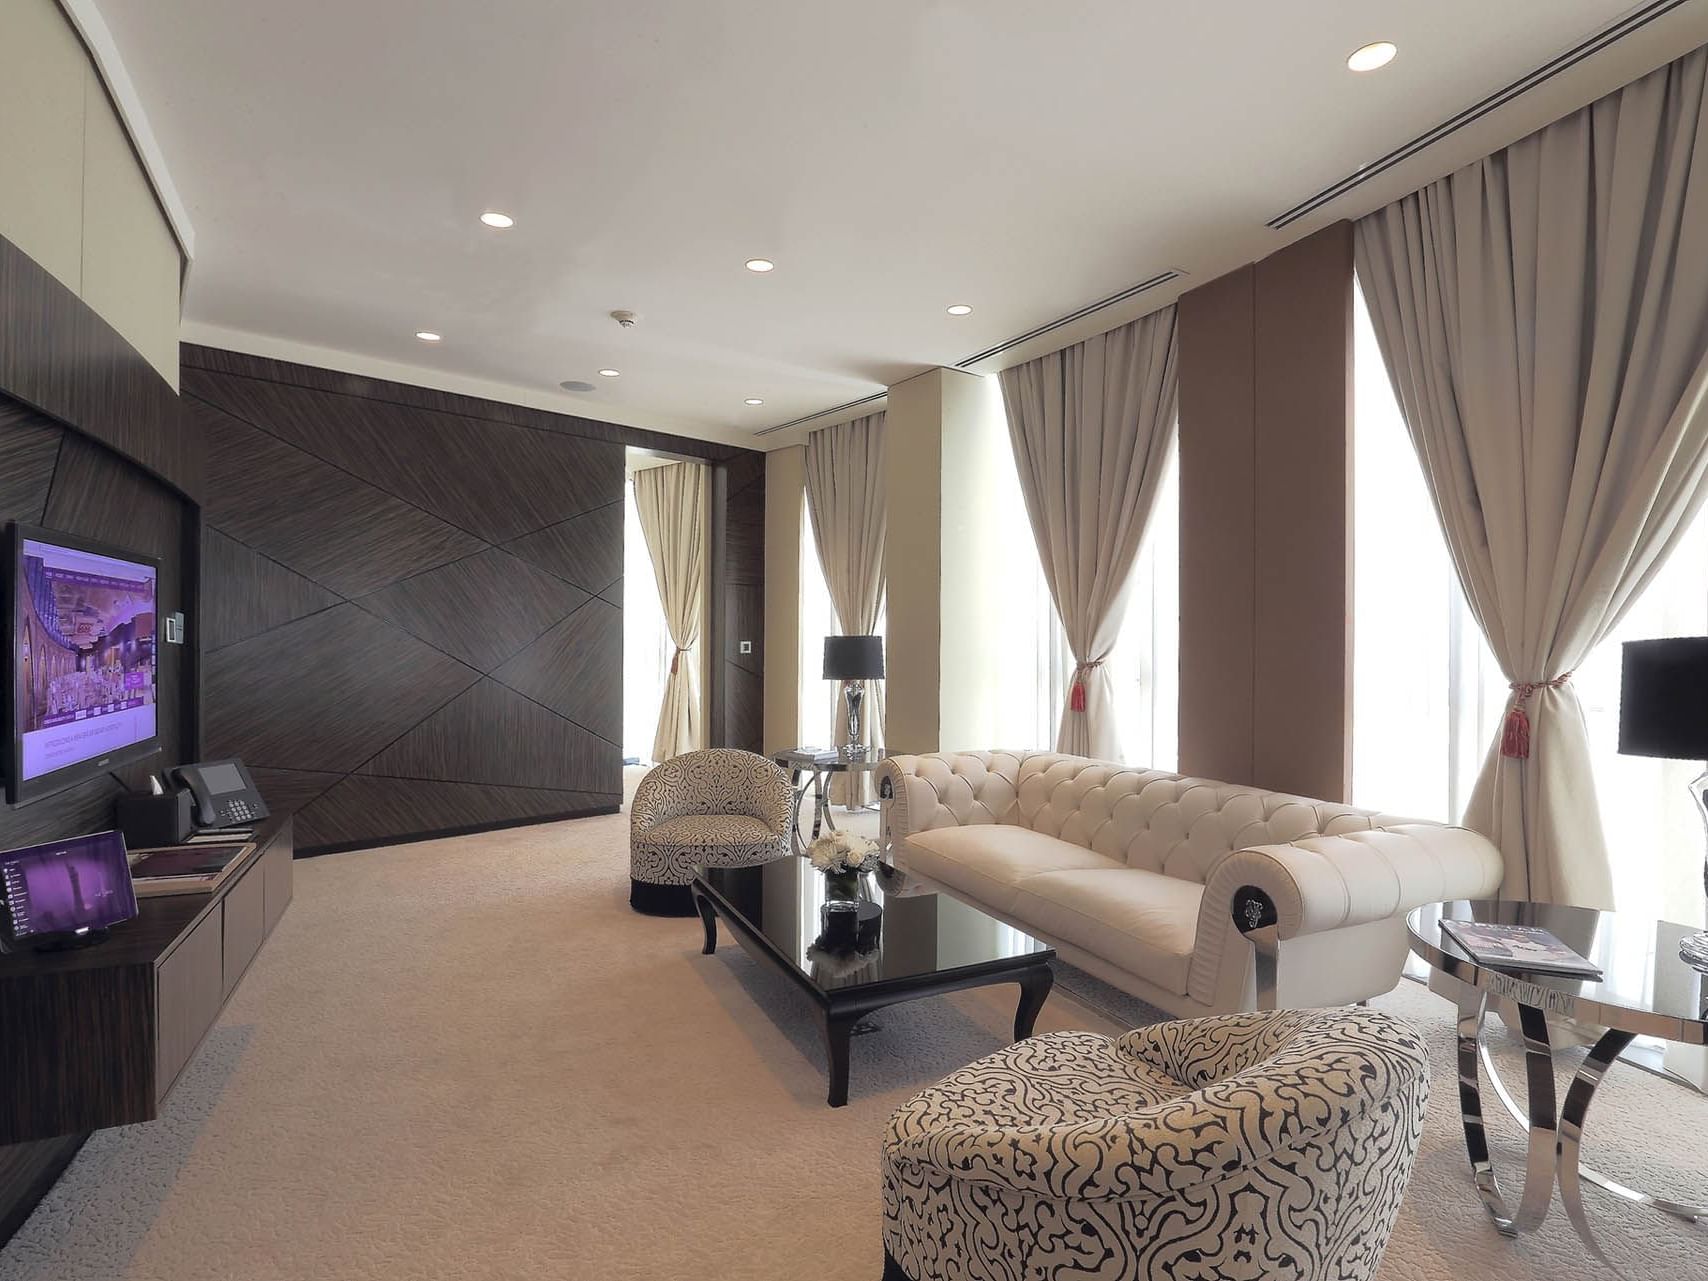 Executive Suite at The Torch Doha Hotel in Qatar